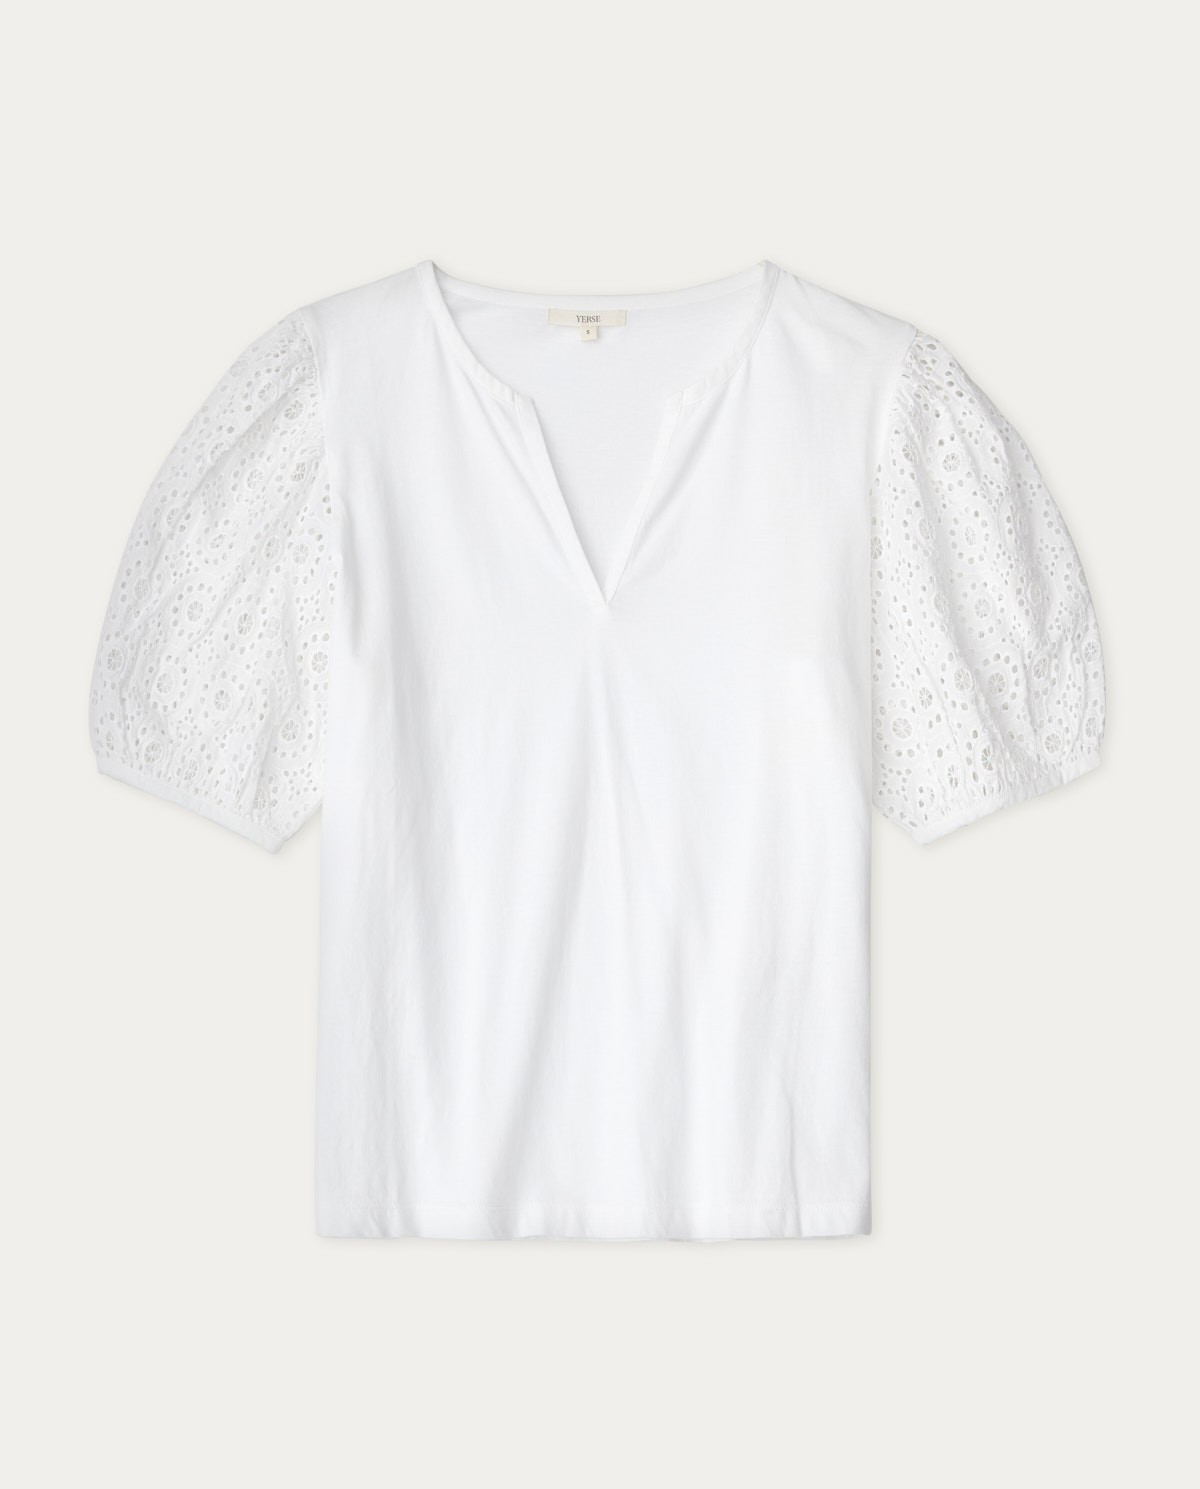 Cotton t-shirt embroidered sleeves White 4